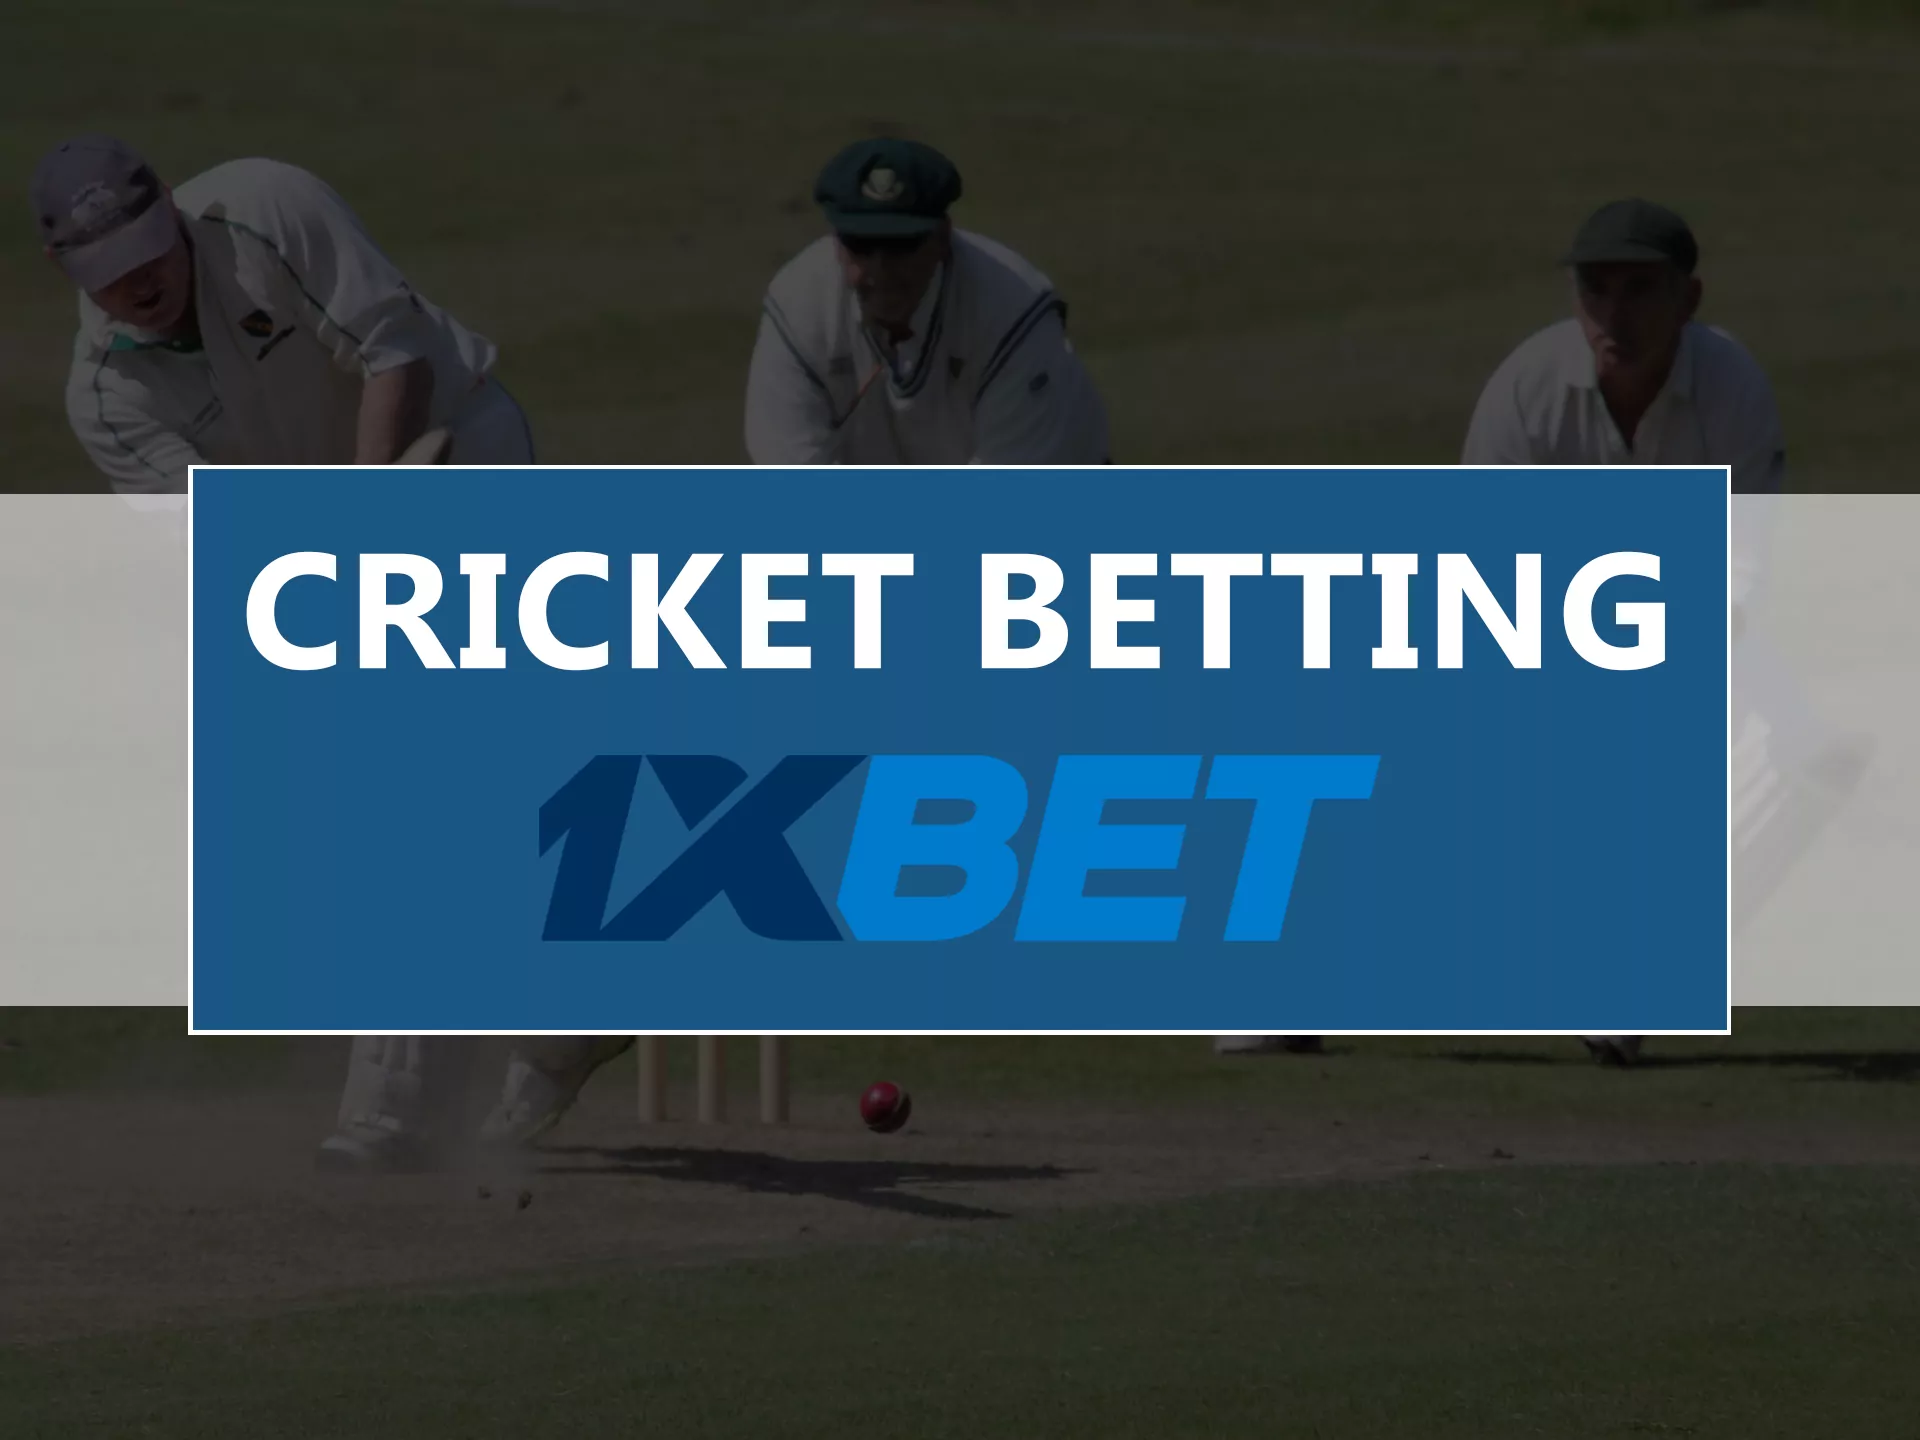 cricket Betting is available 1xbet with highest odds.